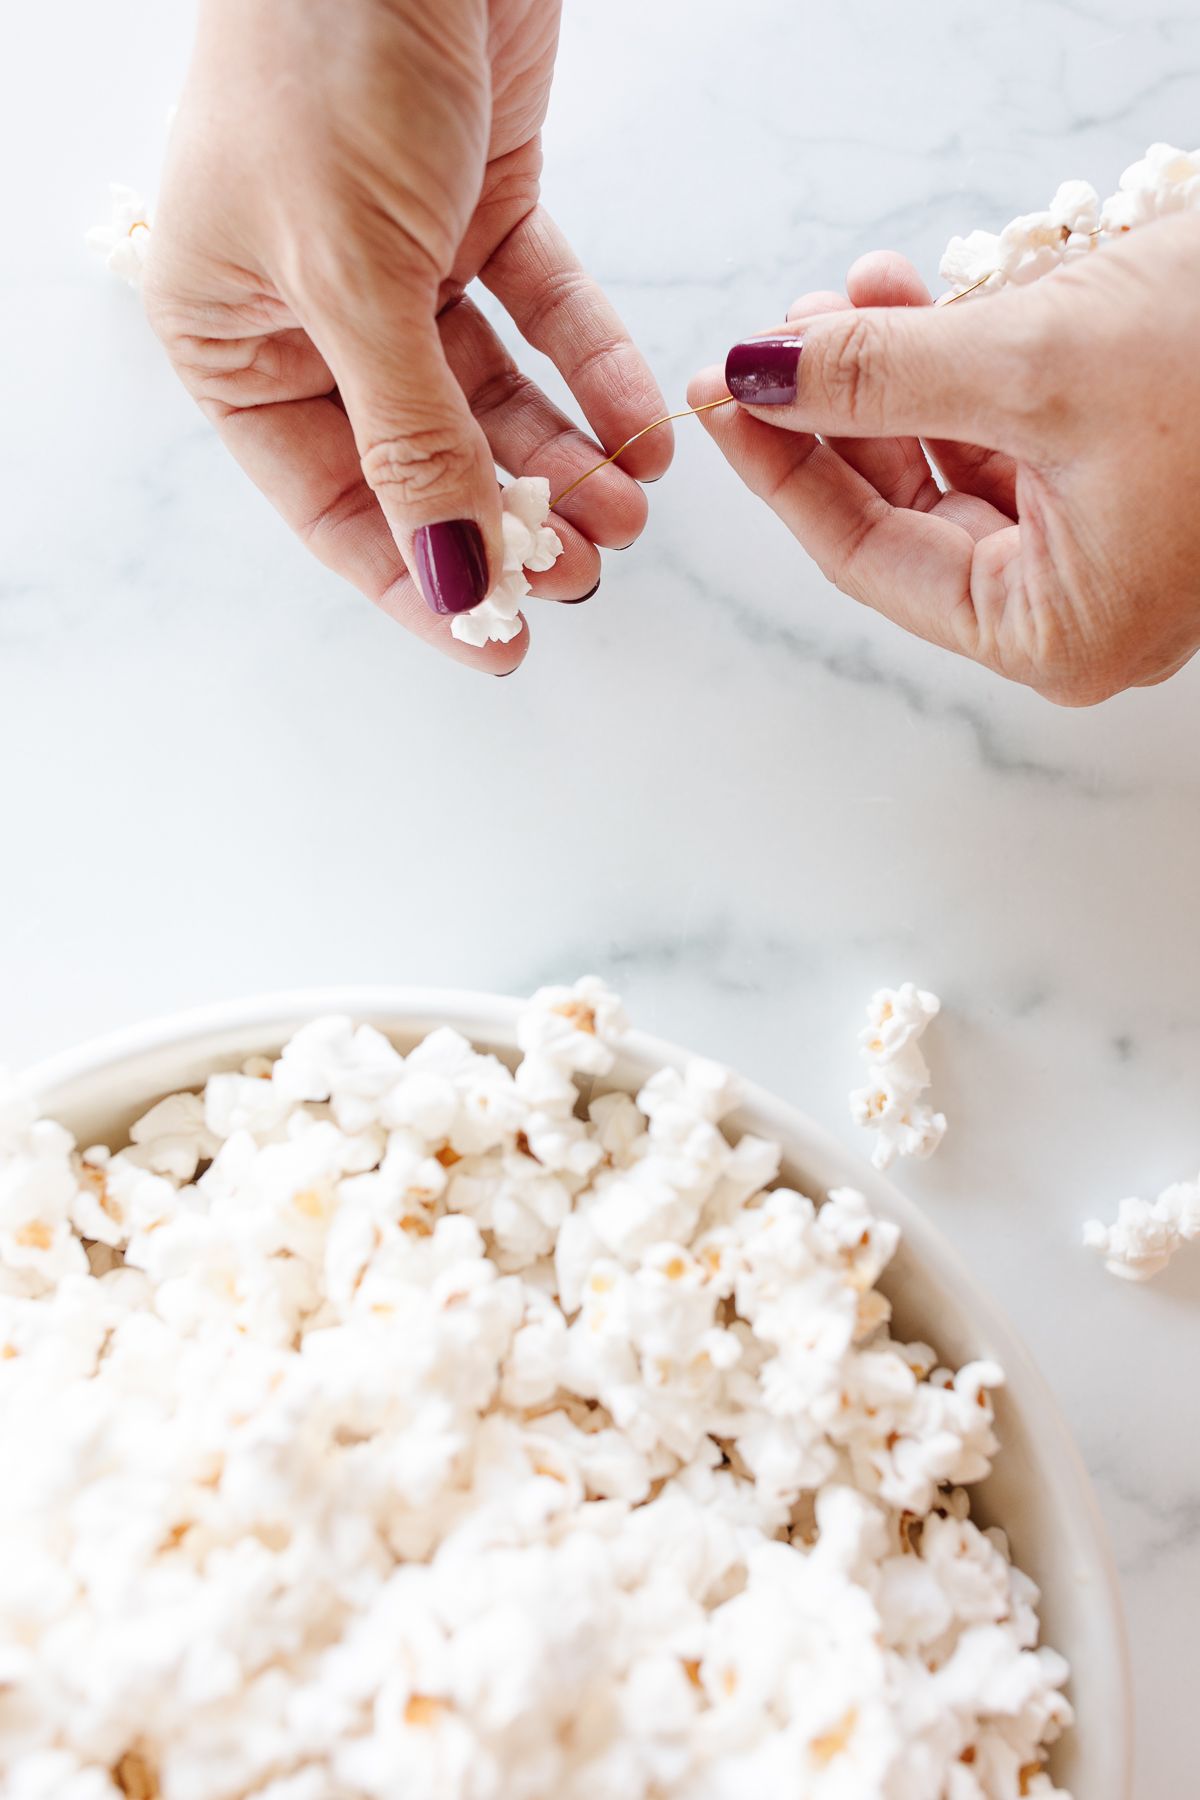 A bowl of popcorn and a woman's hands demonstrating how to make a garland of popcorn.